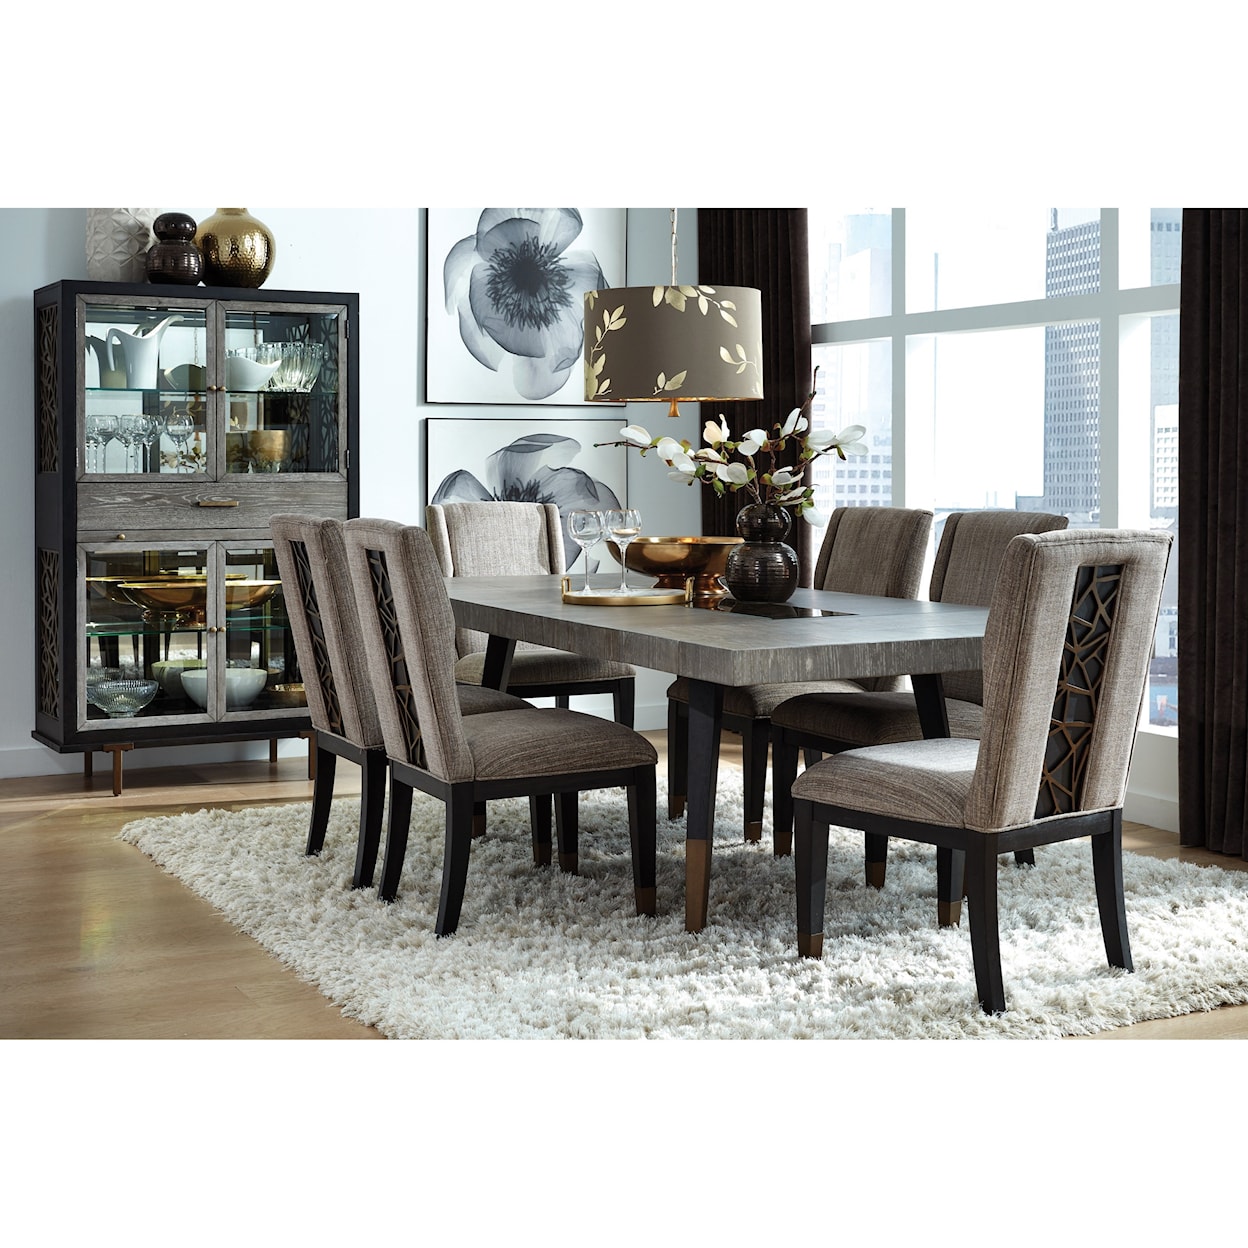 Magnussen Home Ryker Dining Formal Dining Group